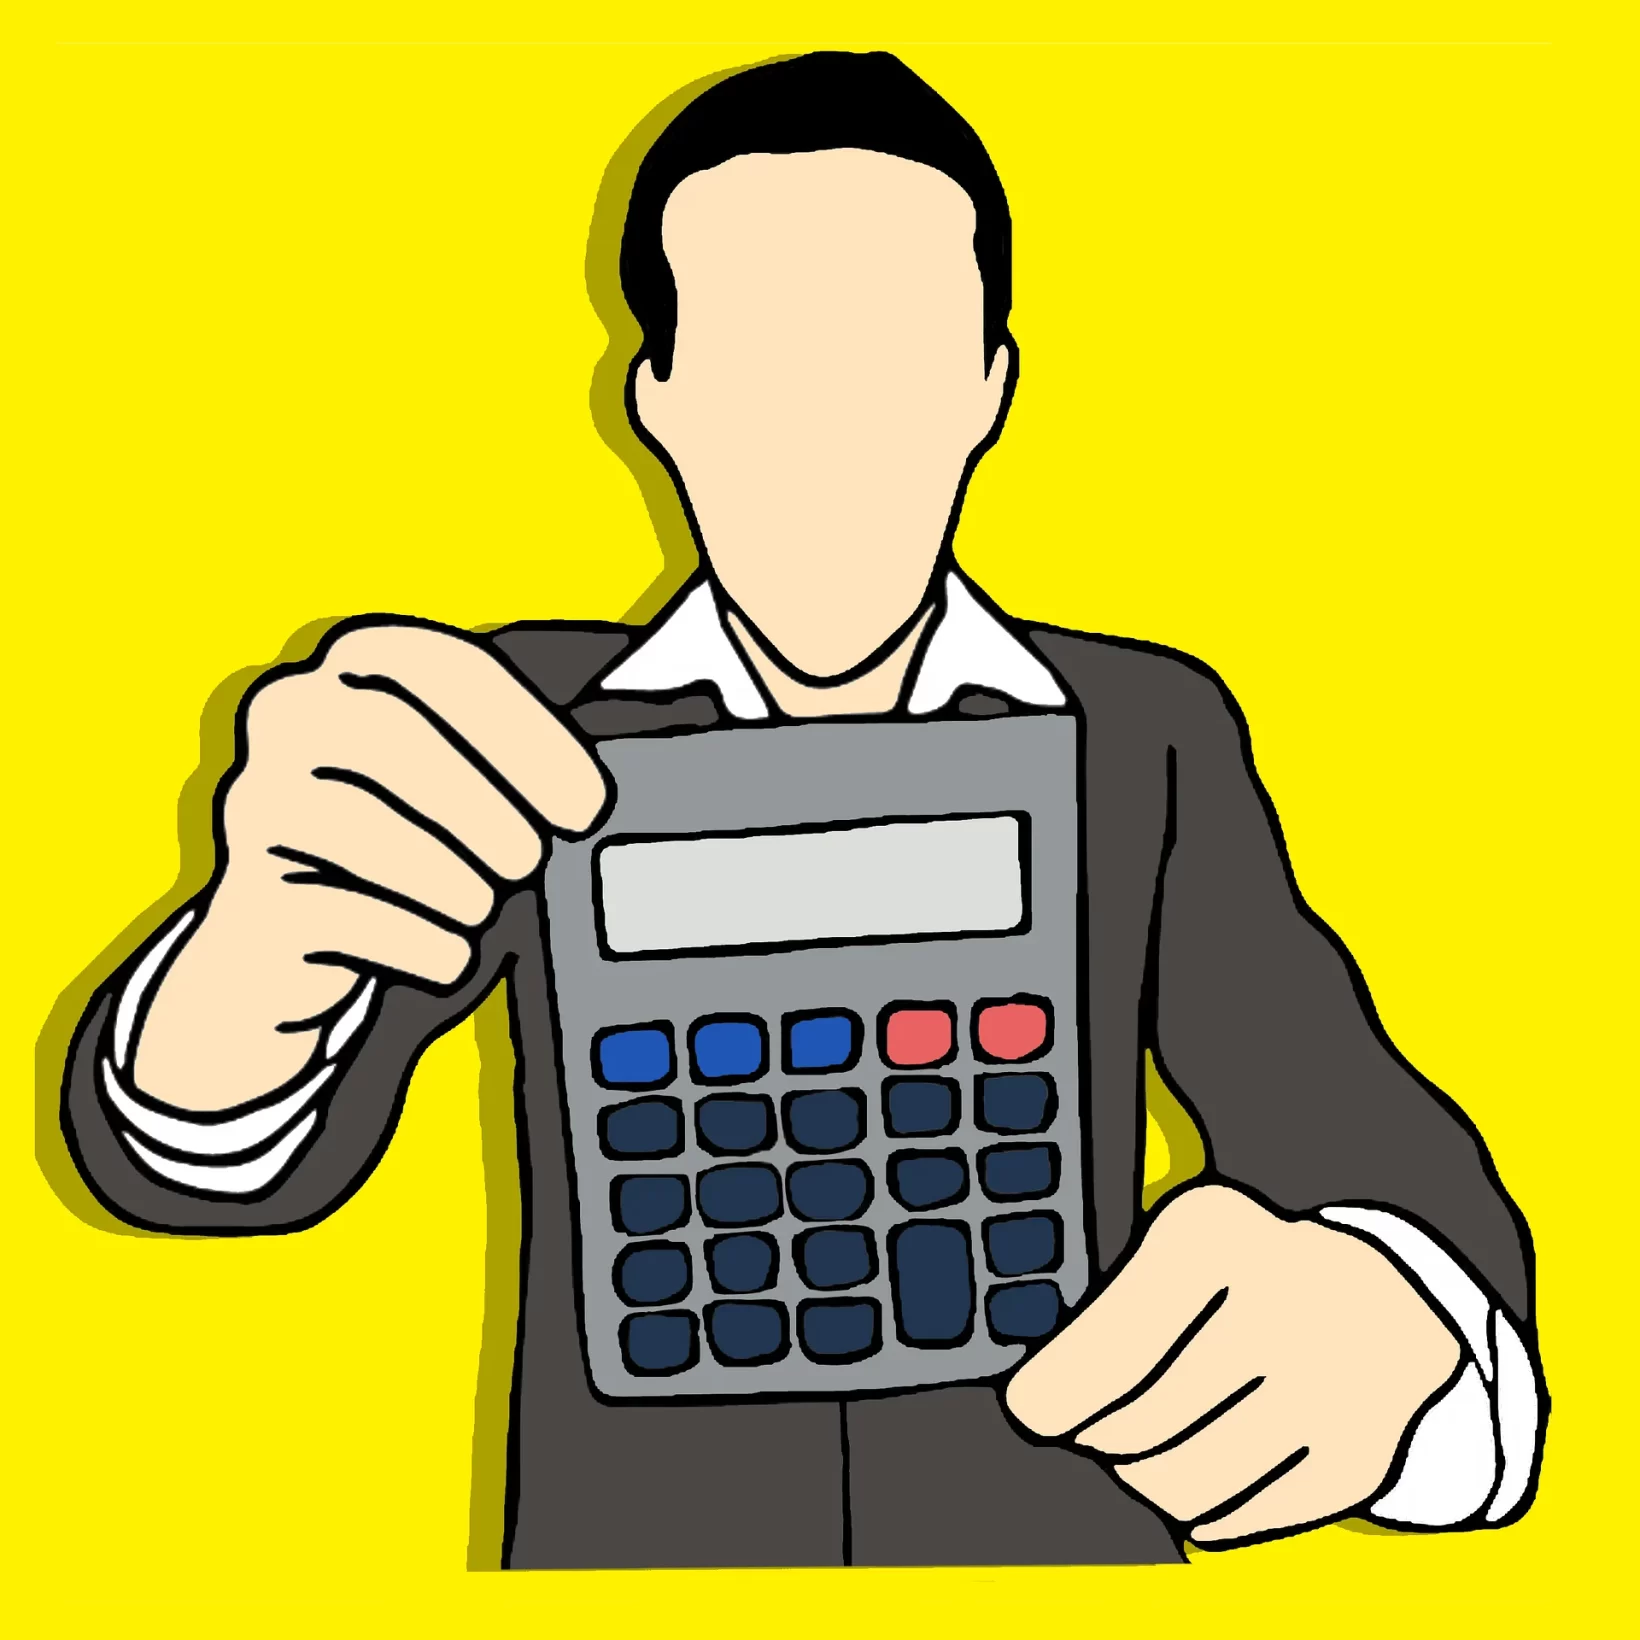 The image with a yellow background shows a person who has a calculator.